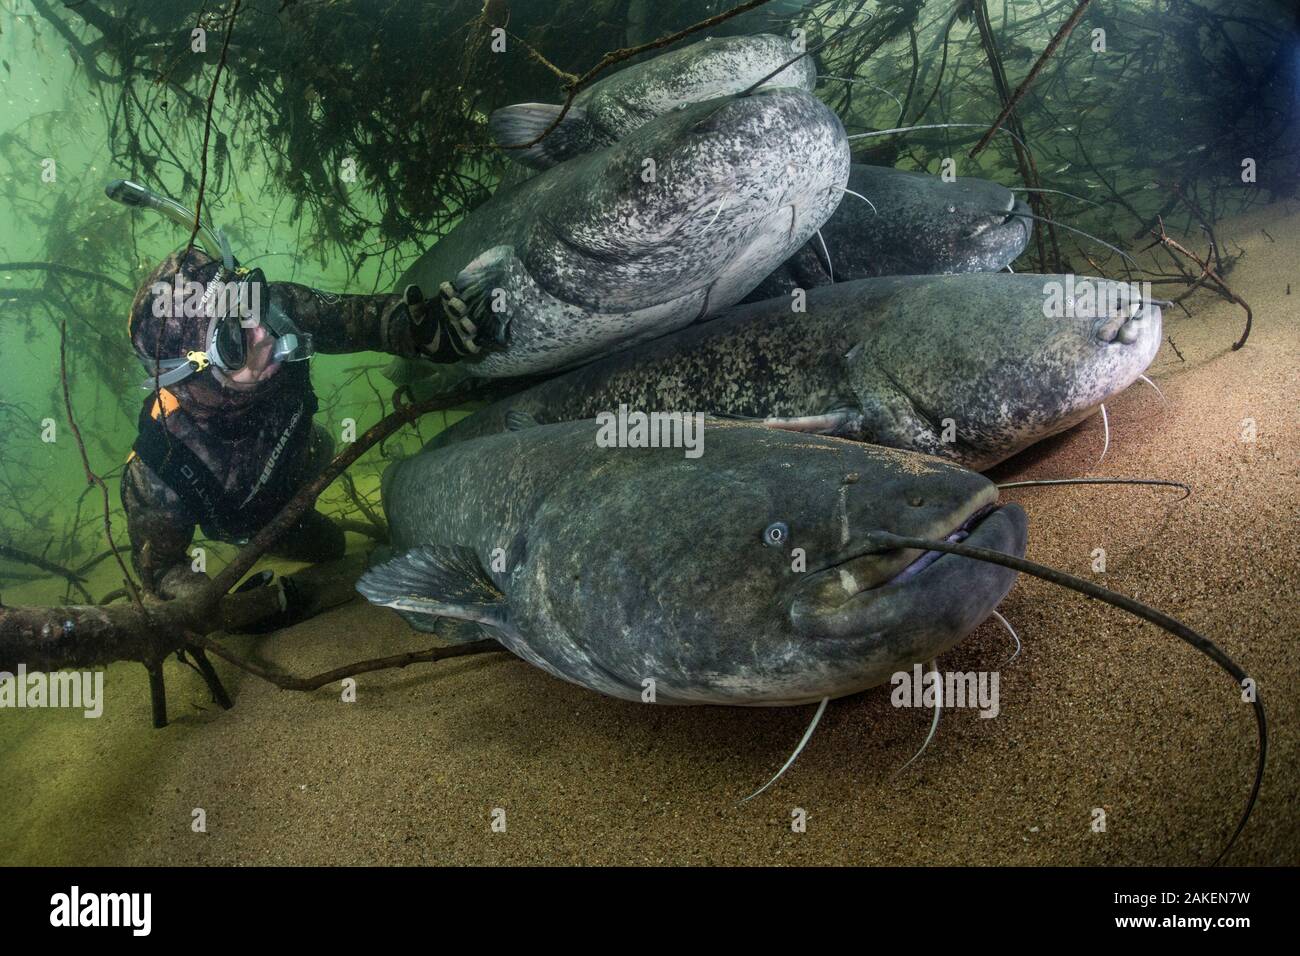 Wels catfish (Silurus glanis), five on riverbed, diver observing. River Loire, France. October. Stock Photo